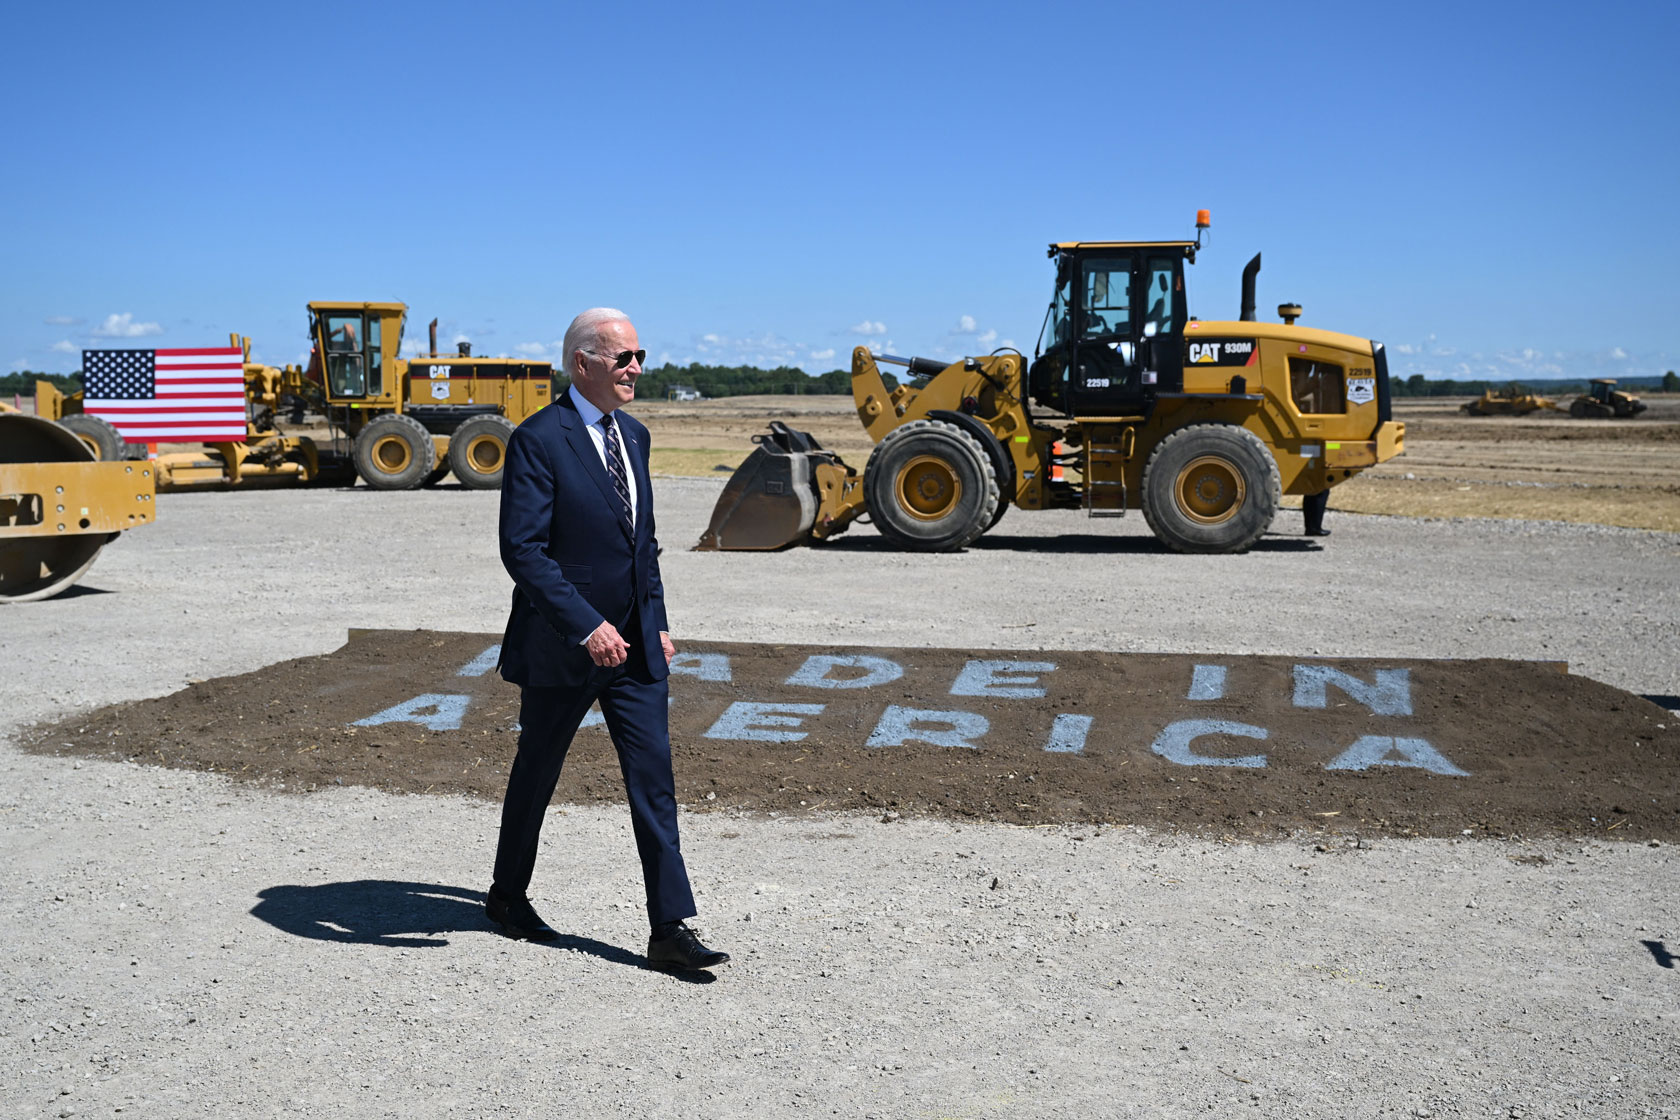 President Joe Biden is seen walking in front of tractors, with an American flag in the background.